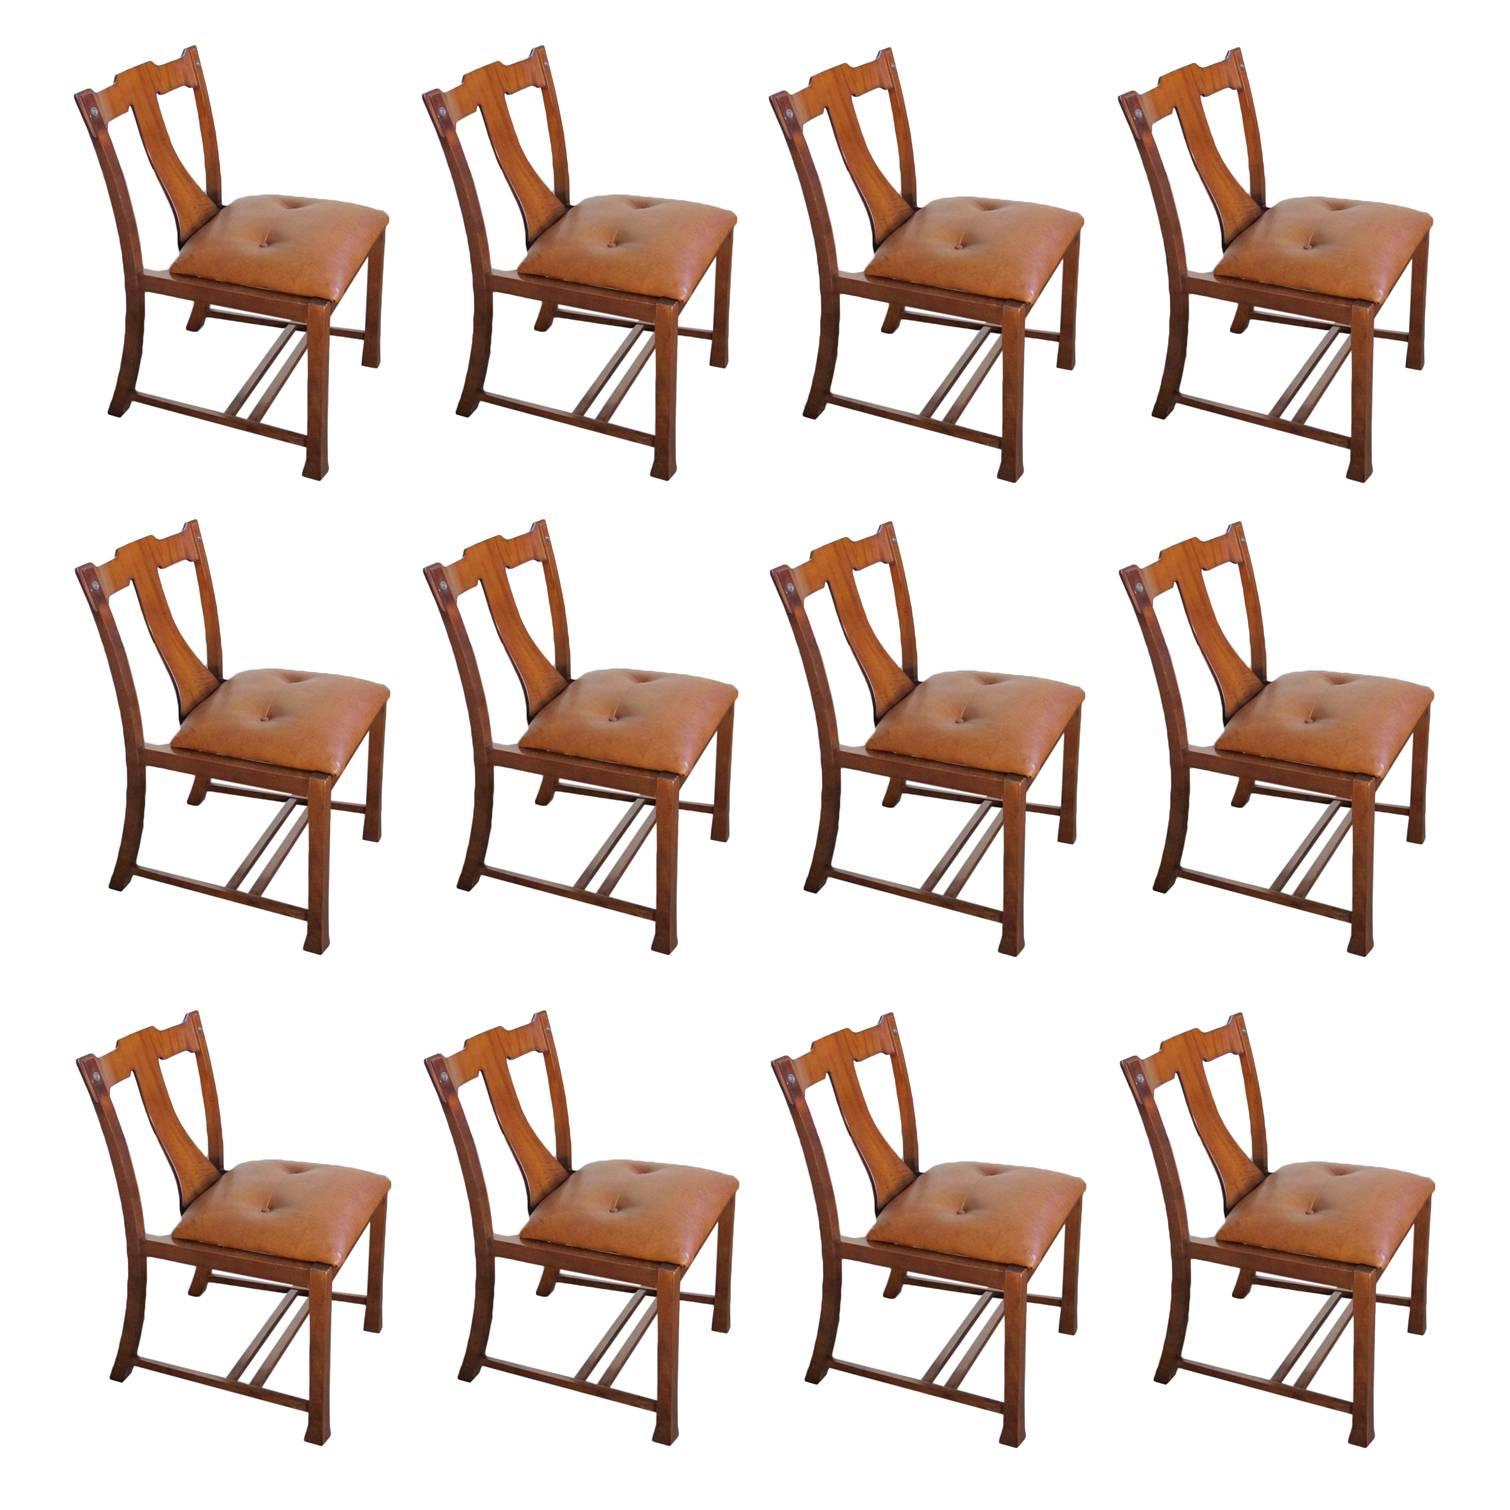 Beautiful Set of 12 Chairs, Italian Design, 1960 For Sale